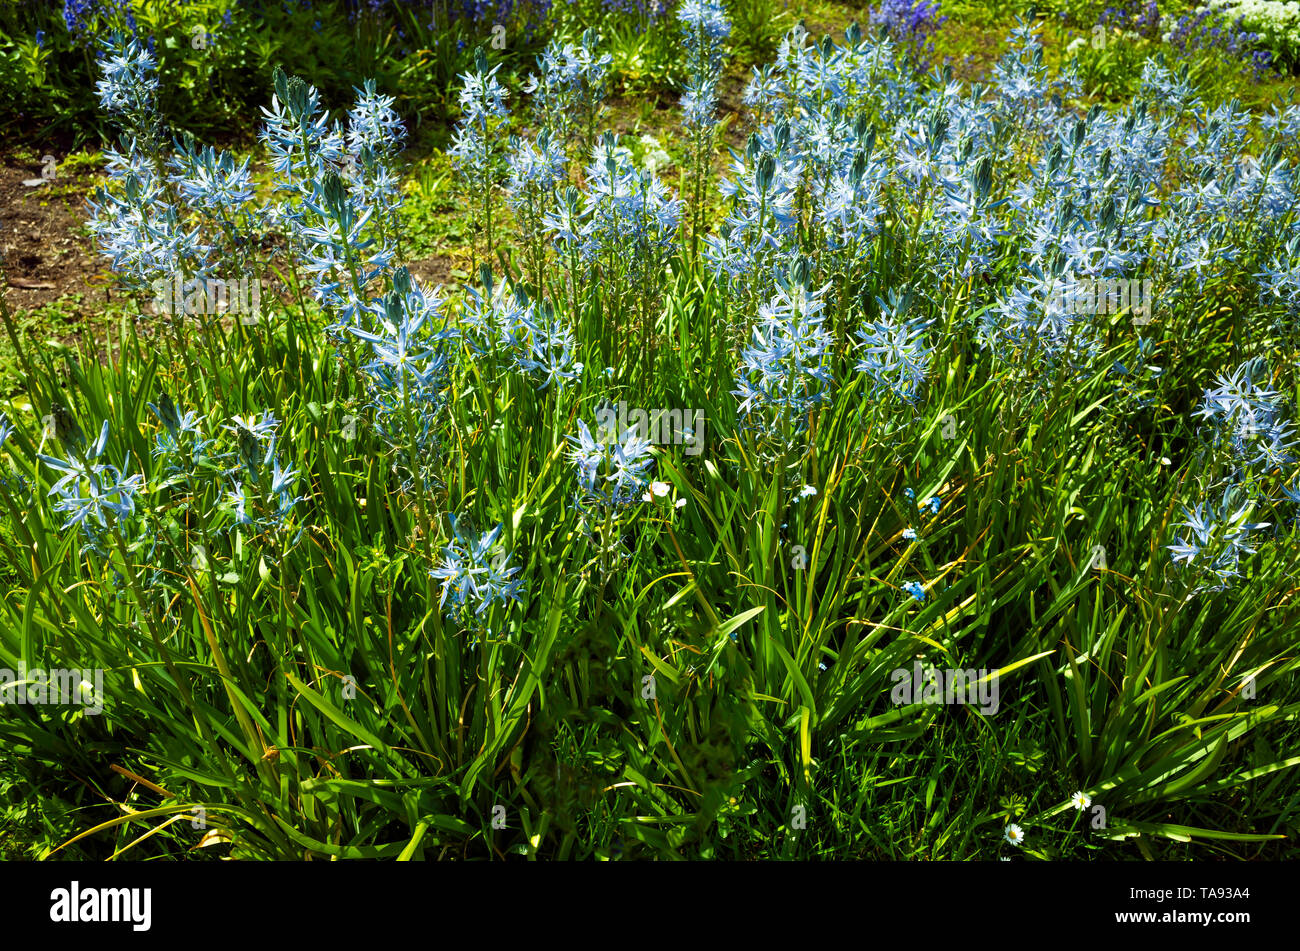 Garden plant Camassia Blue Heaven Camassia leichtlinii flowering in Yorkshire in early spring Stock Photo